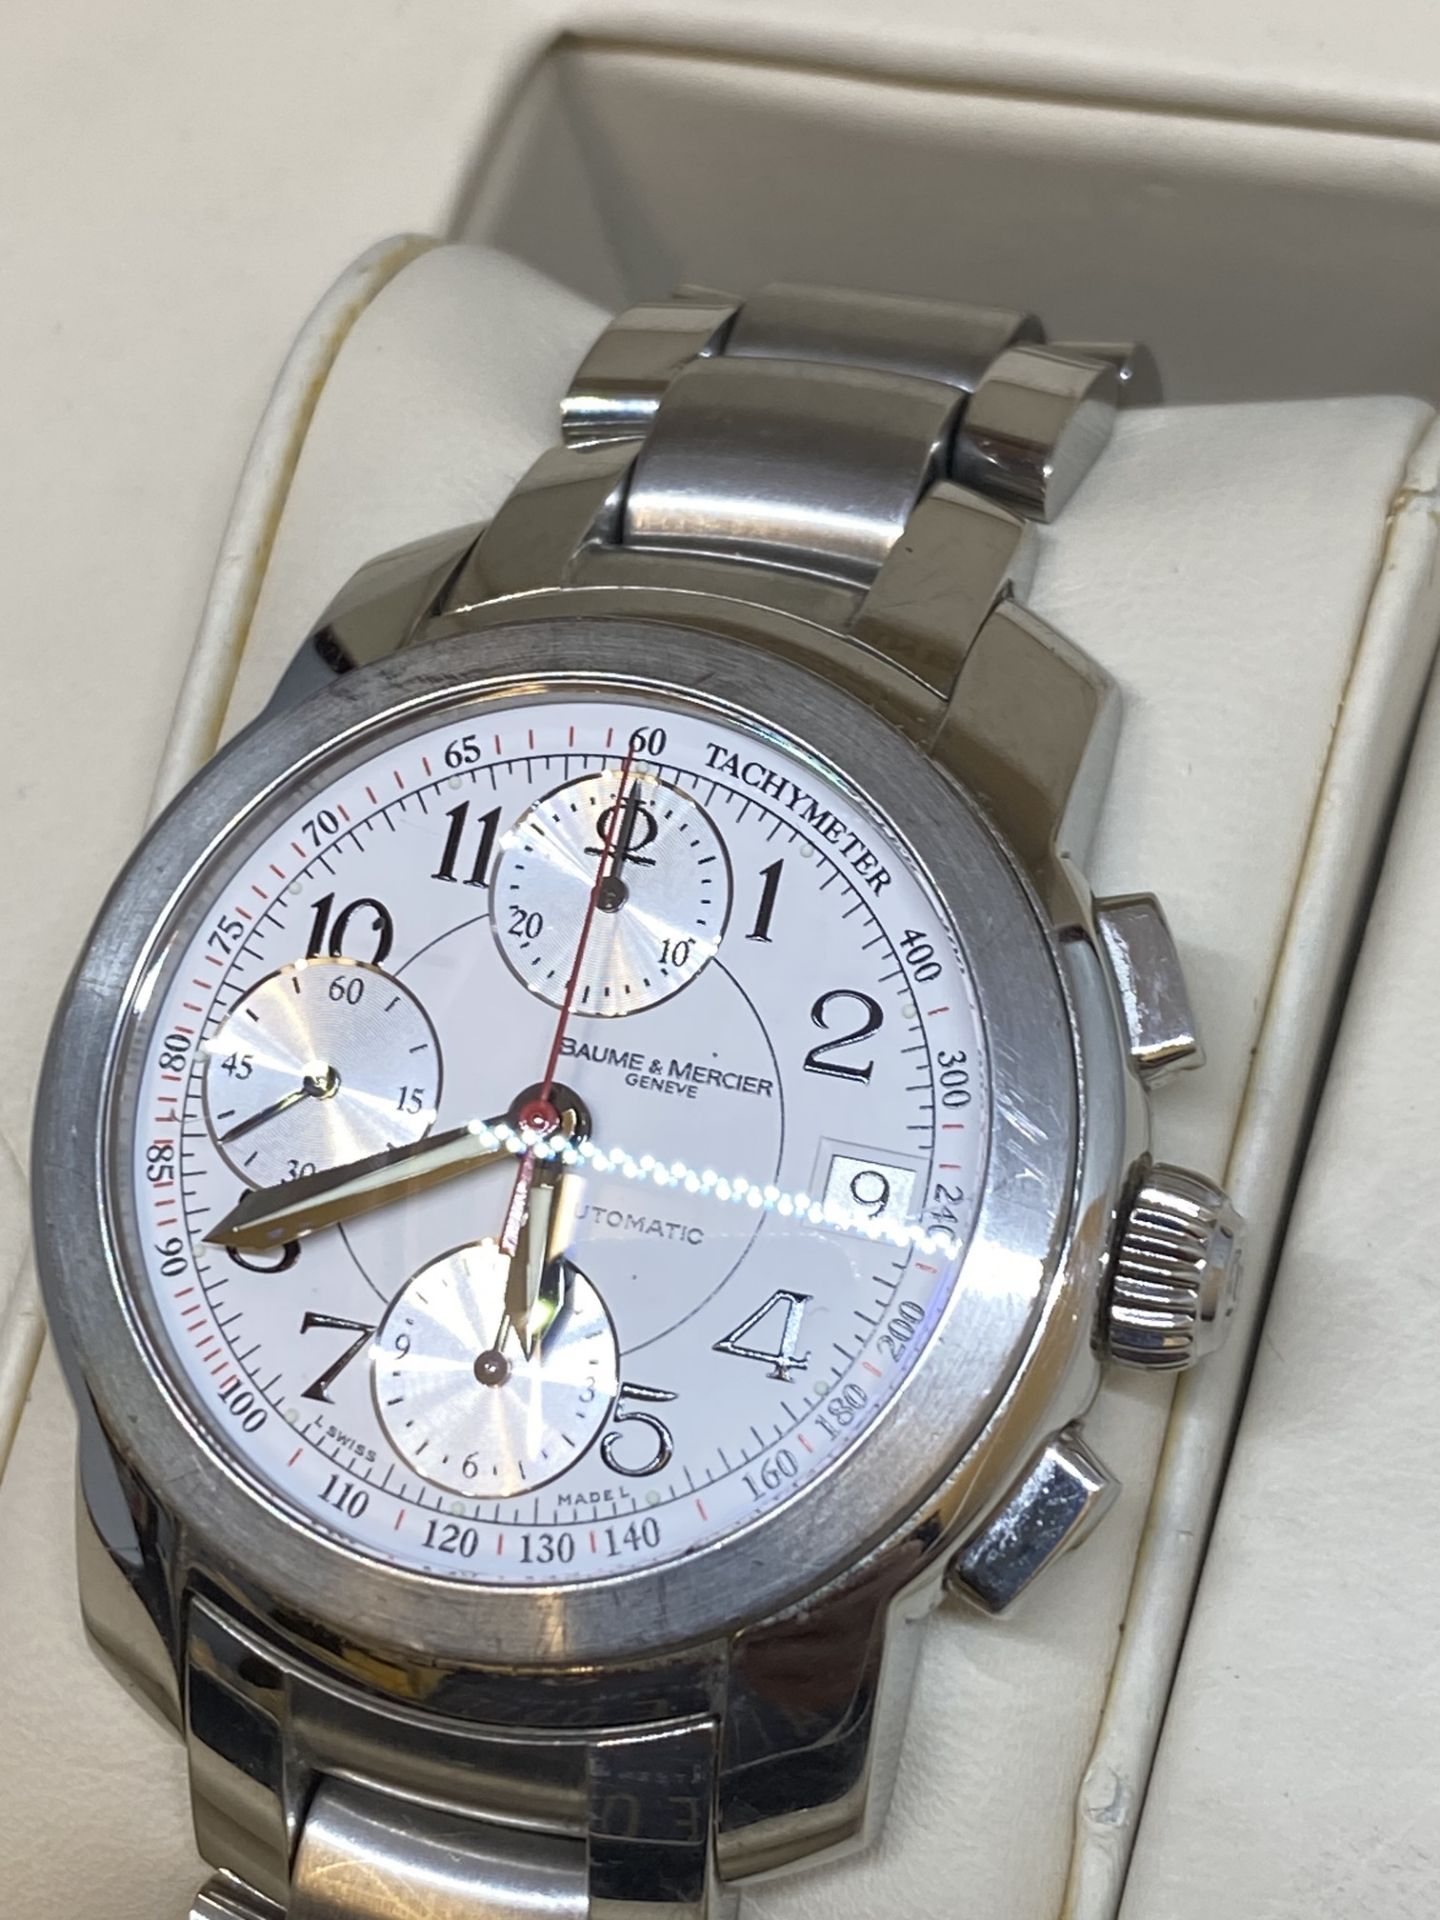 BAUME & MERCIER AUTOMATIC STAINLESS STEEL CHRONO WATCH - Image 4 of 8